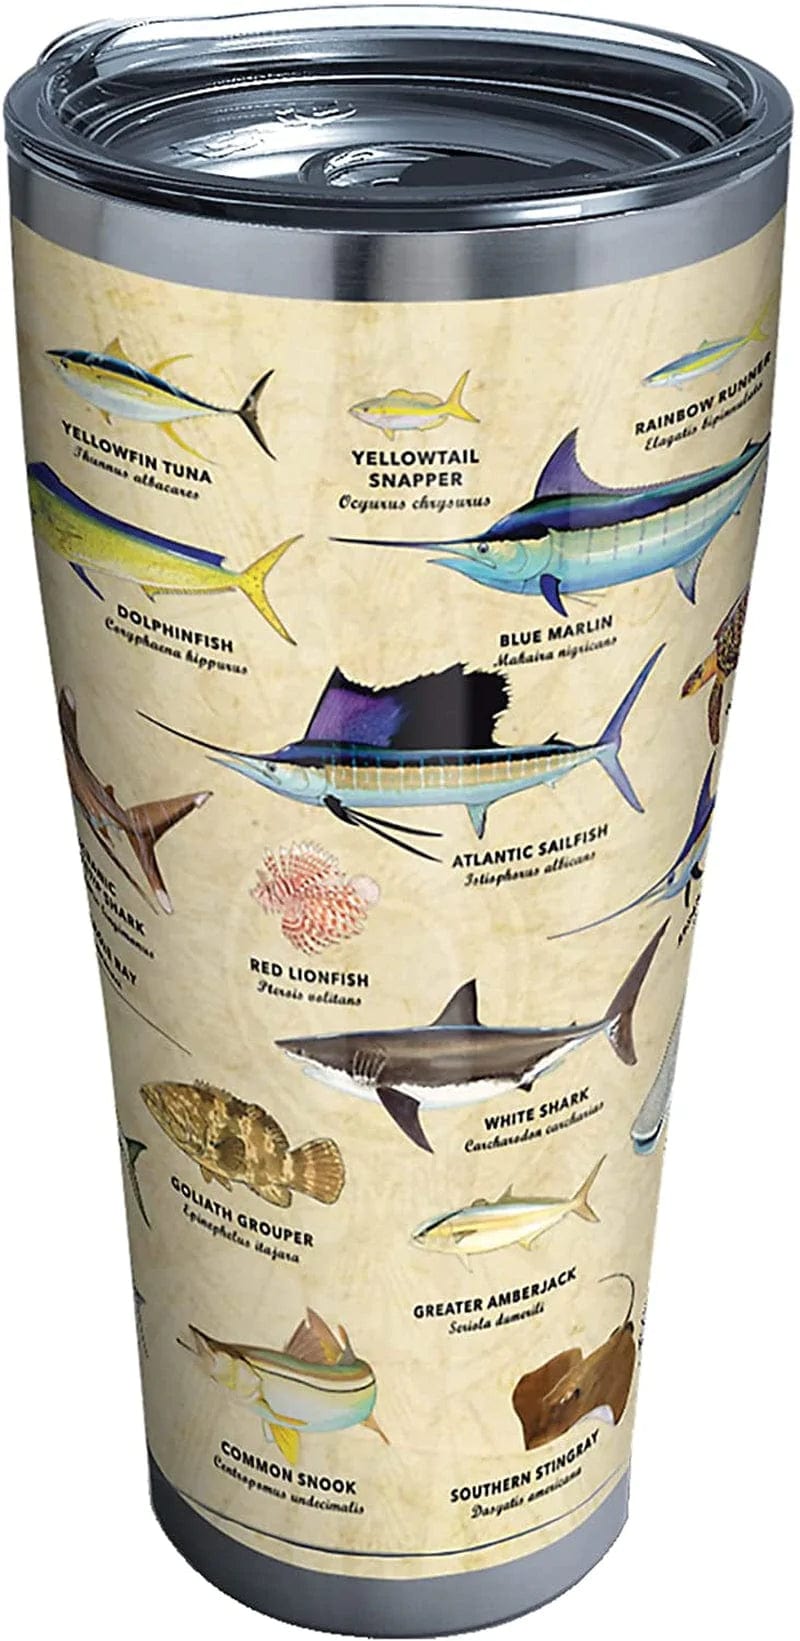 Tervis Made in USA Double Walled Guy Harvey Insulated Tumbler Cup Keeps Drinks Cold & Hot, 16Oz Mug - No Lid, Charts Home & Garden > Kitchen & Dining > Tableware > Drinkware Tervis Stainless Steel 30oz 